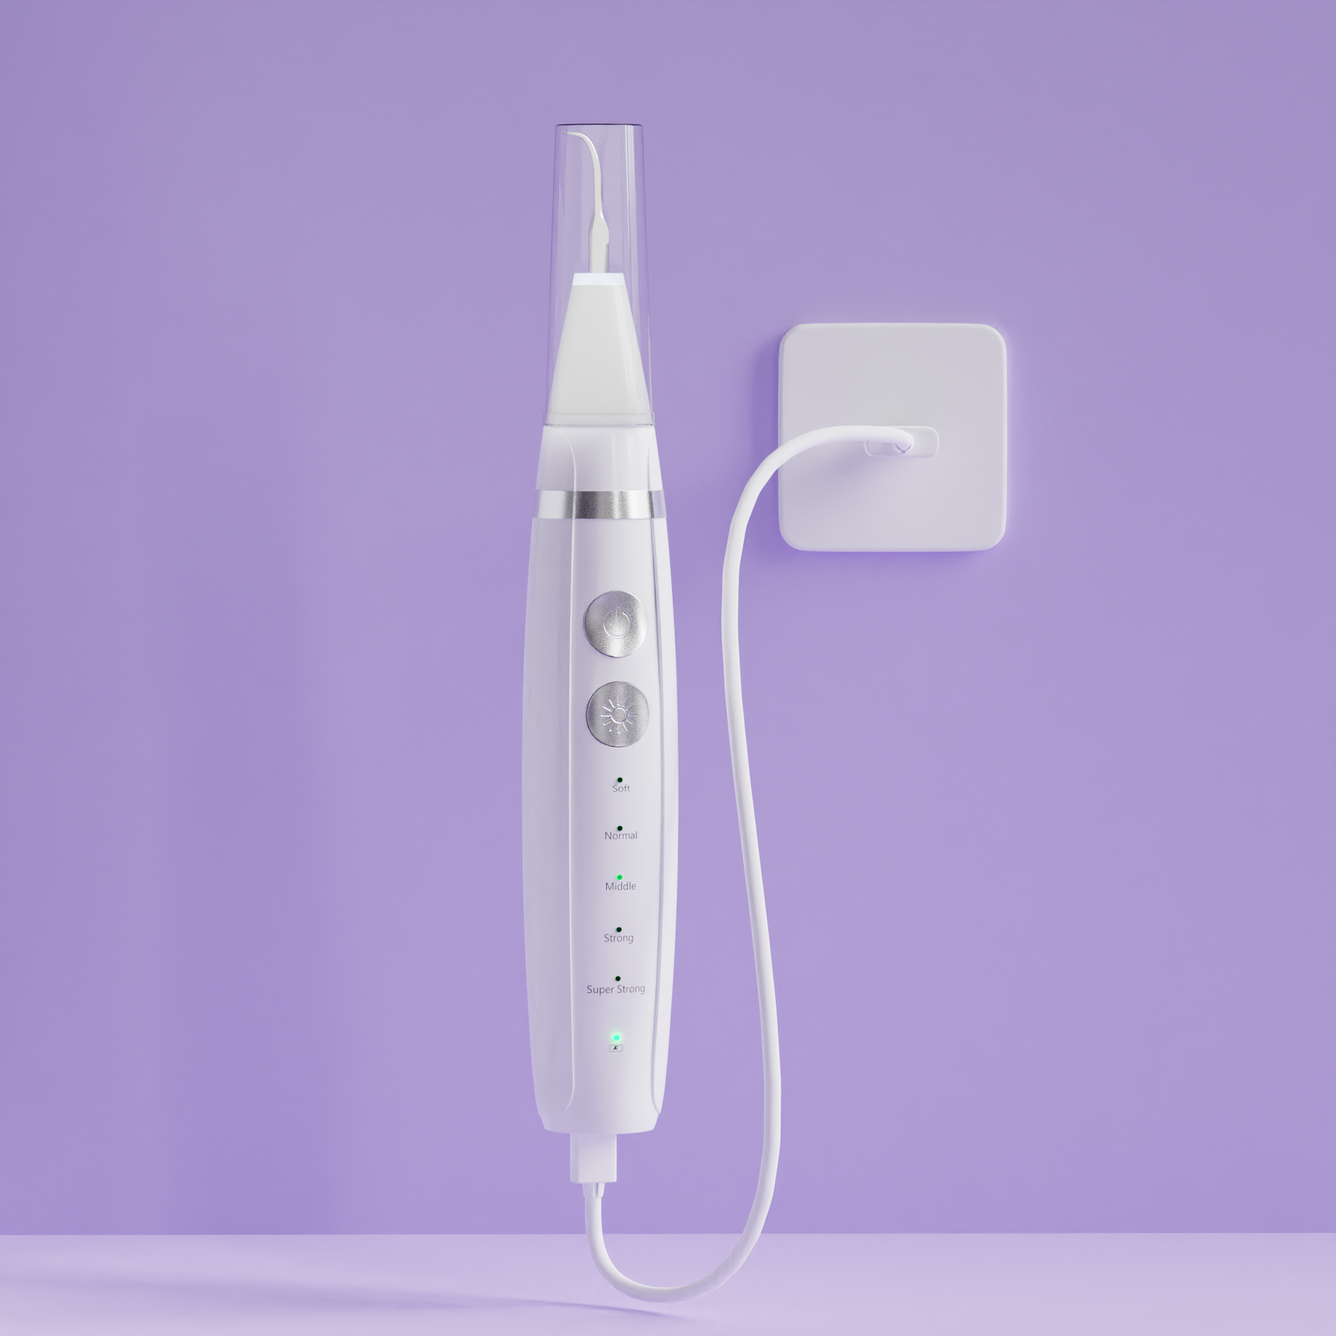 Ultrasonic Tooth Cleaner - Remove Plaque & Stains at Home